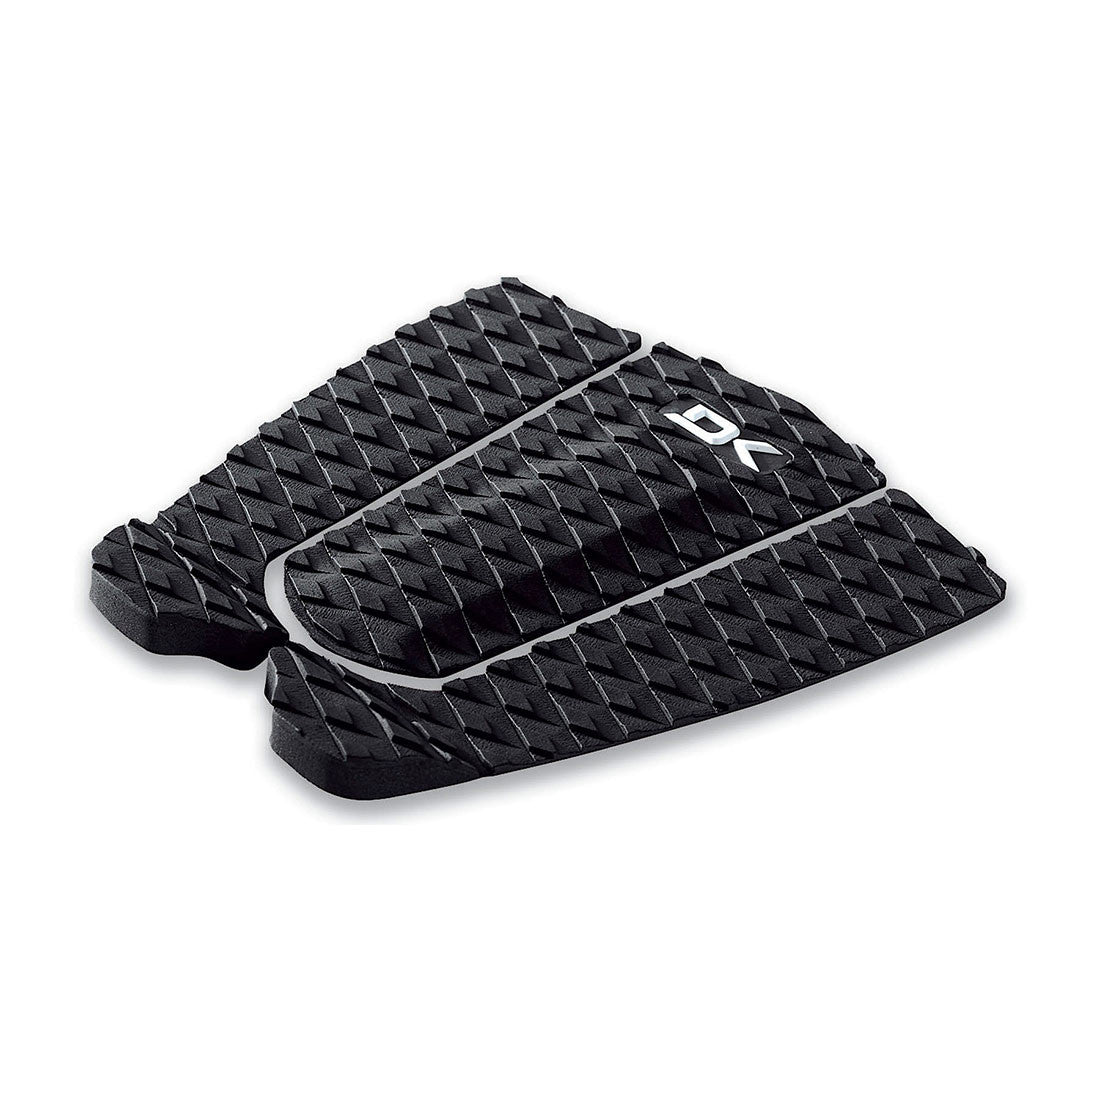 Dakine Andy Irons Pro Surfboard Traction Pad